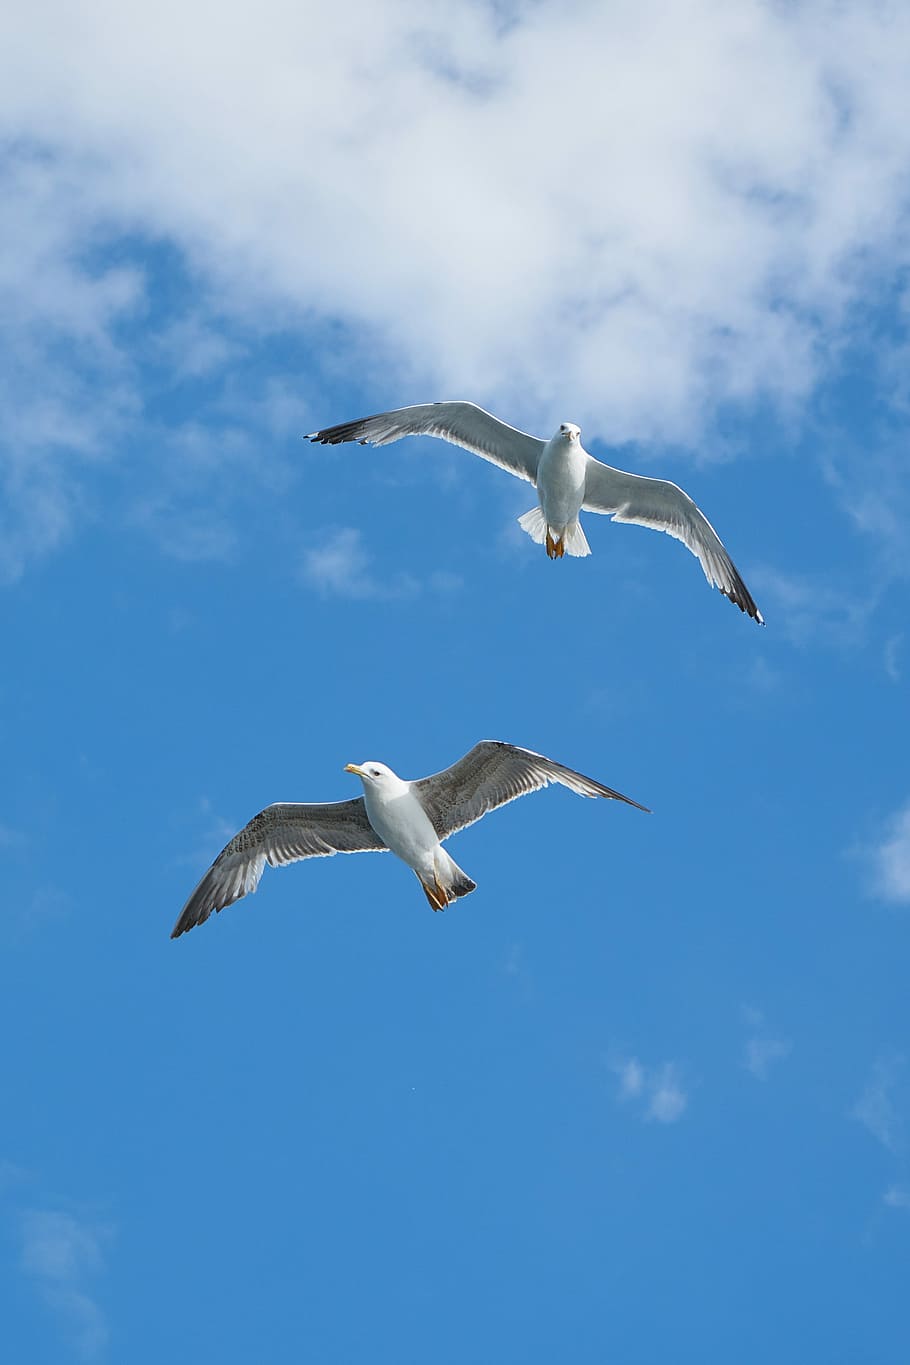 two, flying, white-and-gray birds, Seagull, Bird, Gulls, birds, blue, nature, background